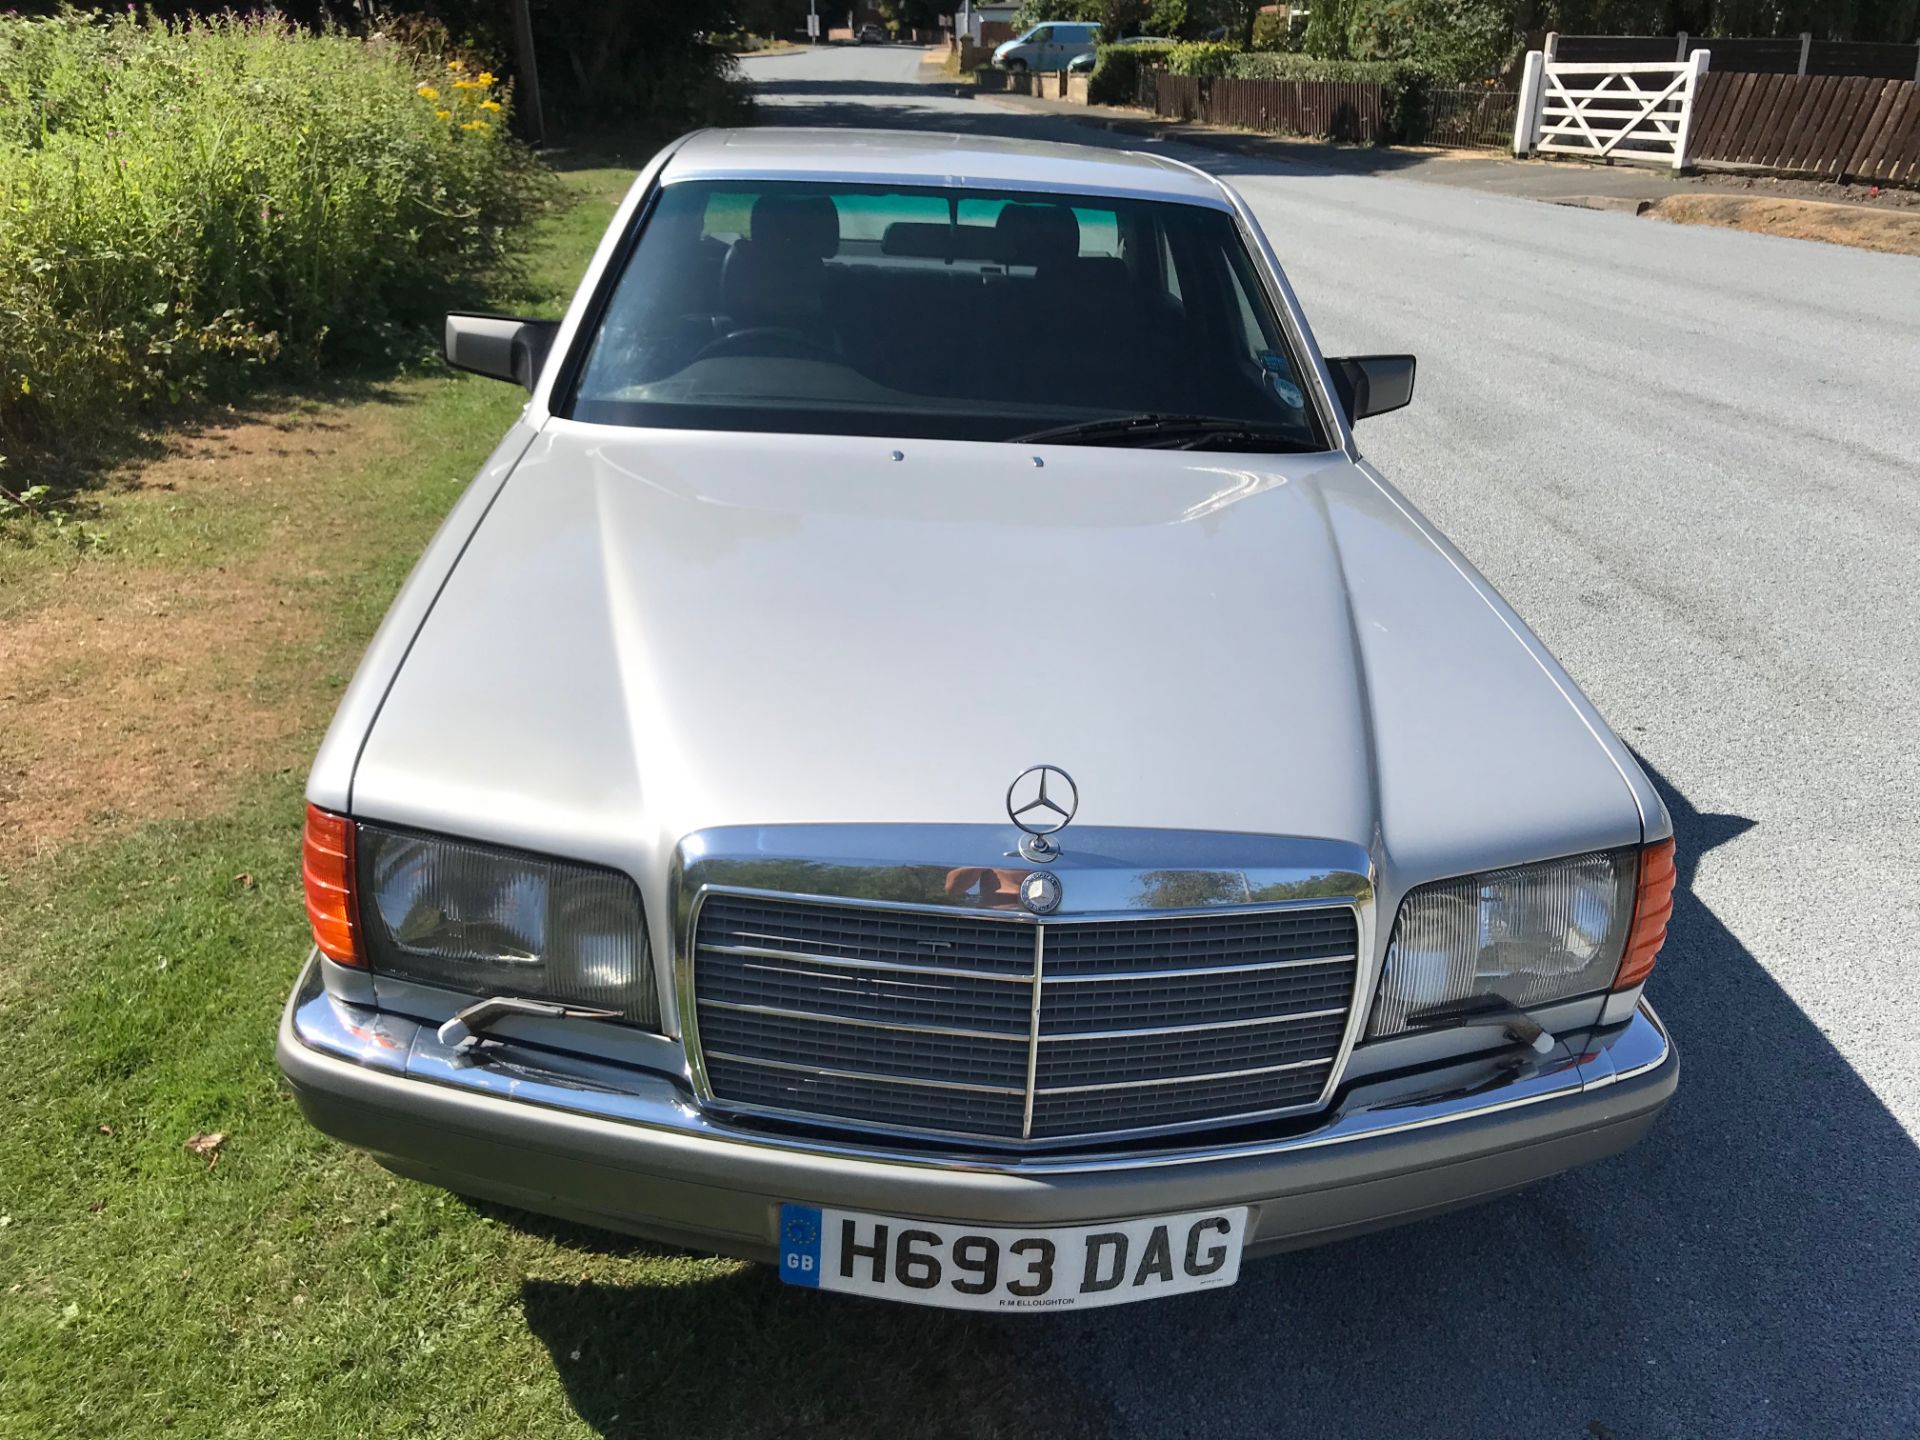 Mercedes 300 SE Automatic - Image 4 of 69